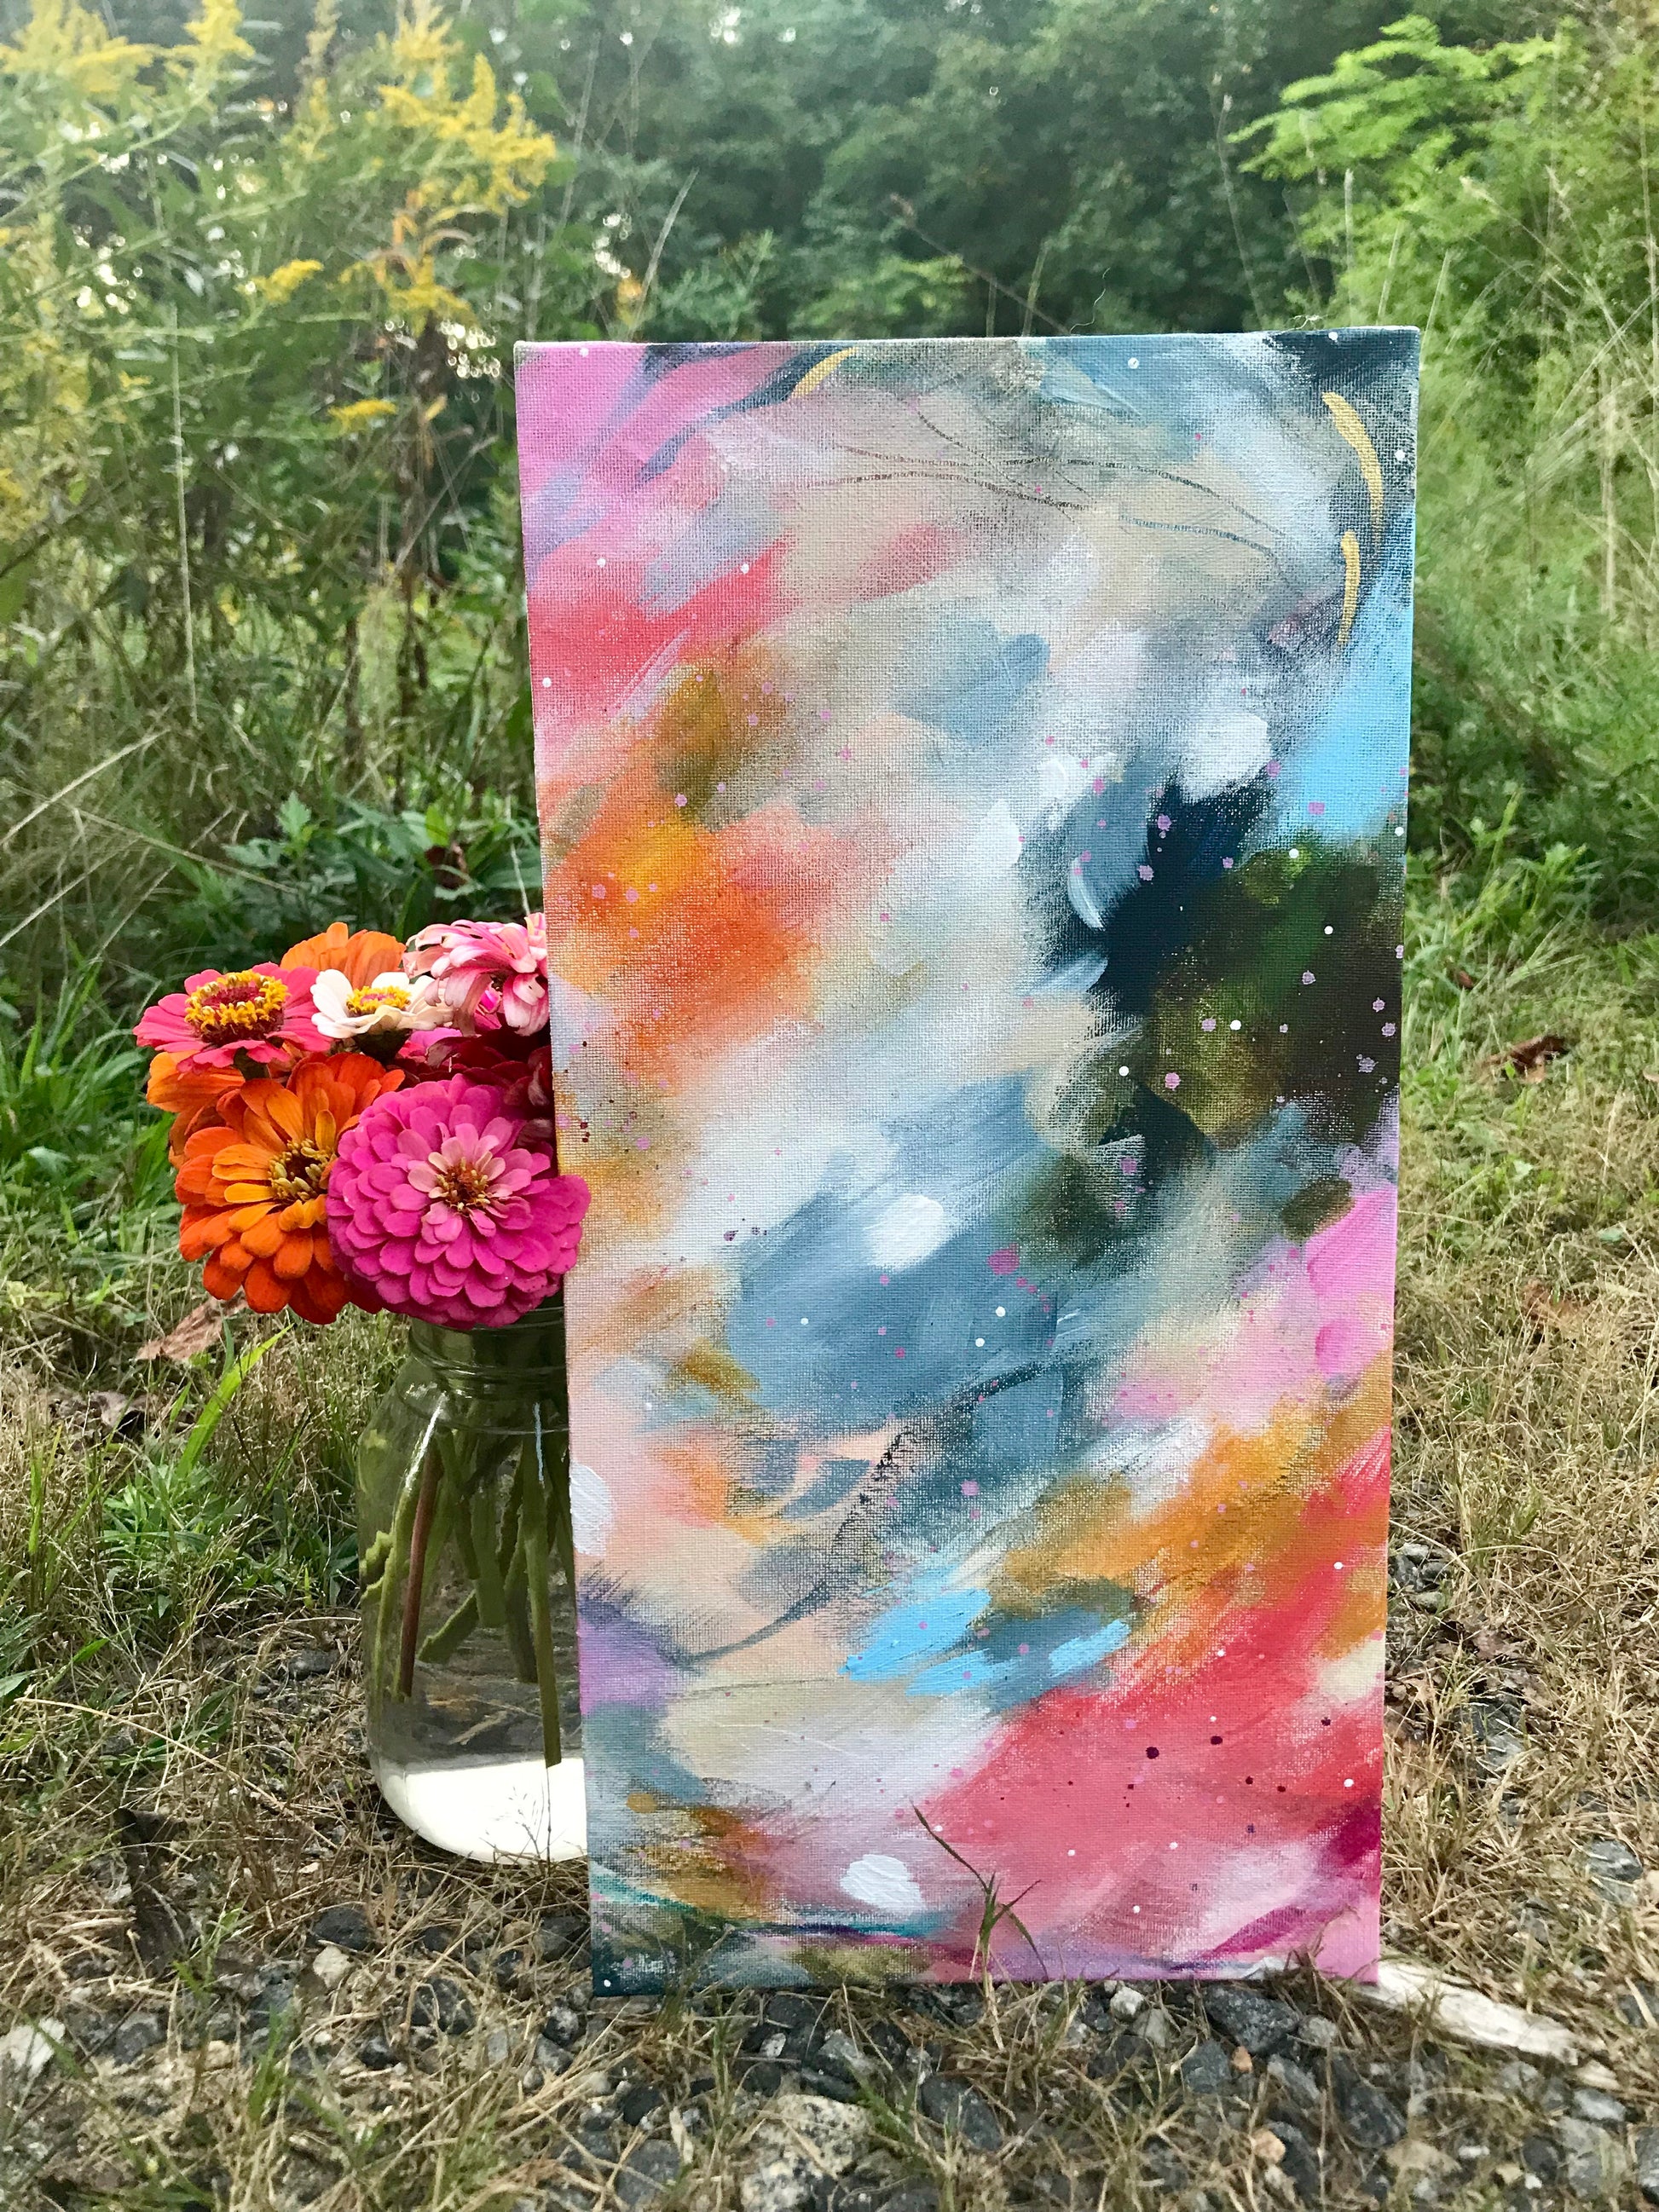 Abstract Original Painting "Love You Most" 8x16 inch Canvas Panel - Bethany Joy Art